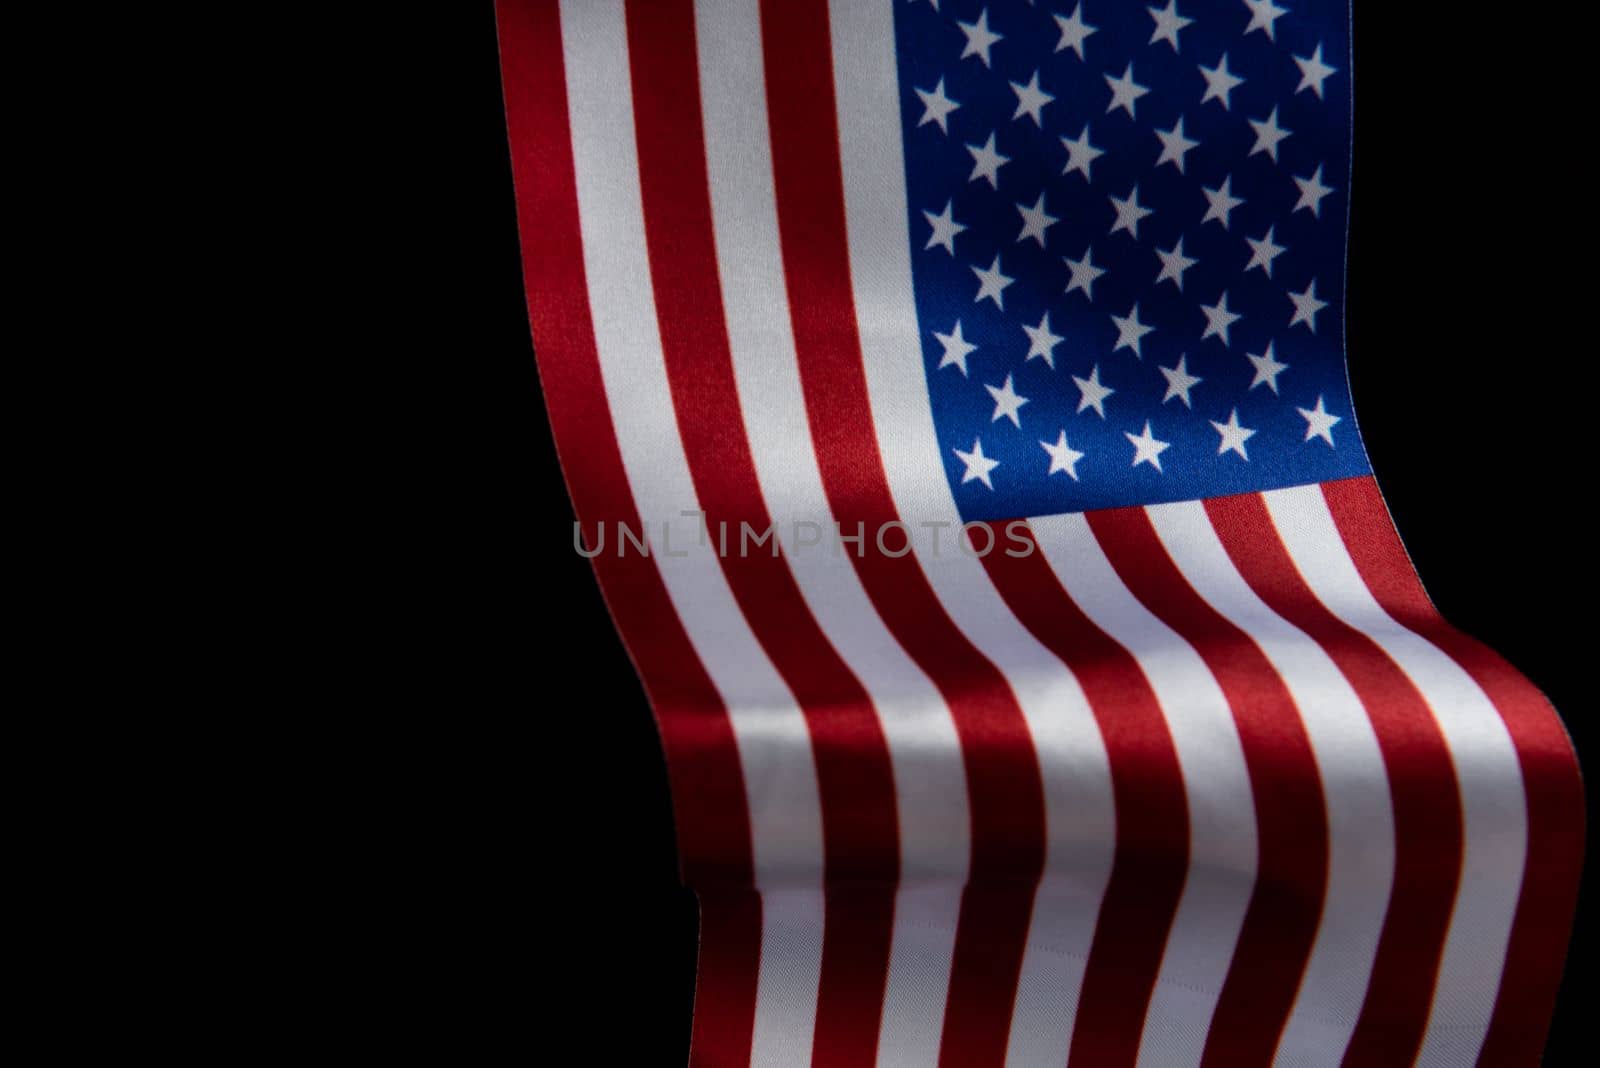 The U.S. flag is developing in the wind against a dark background. Isolate.